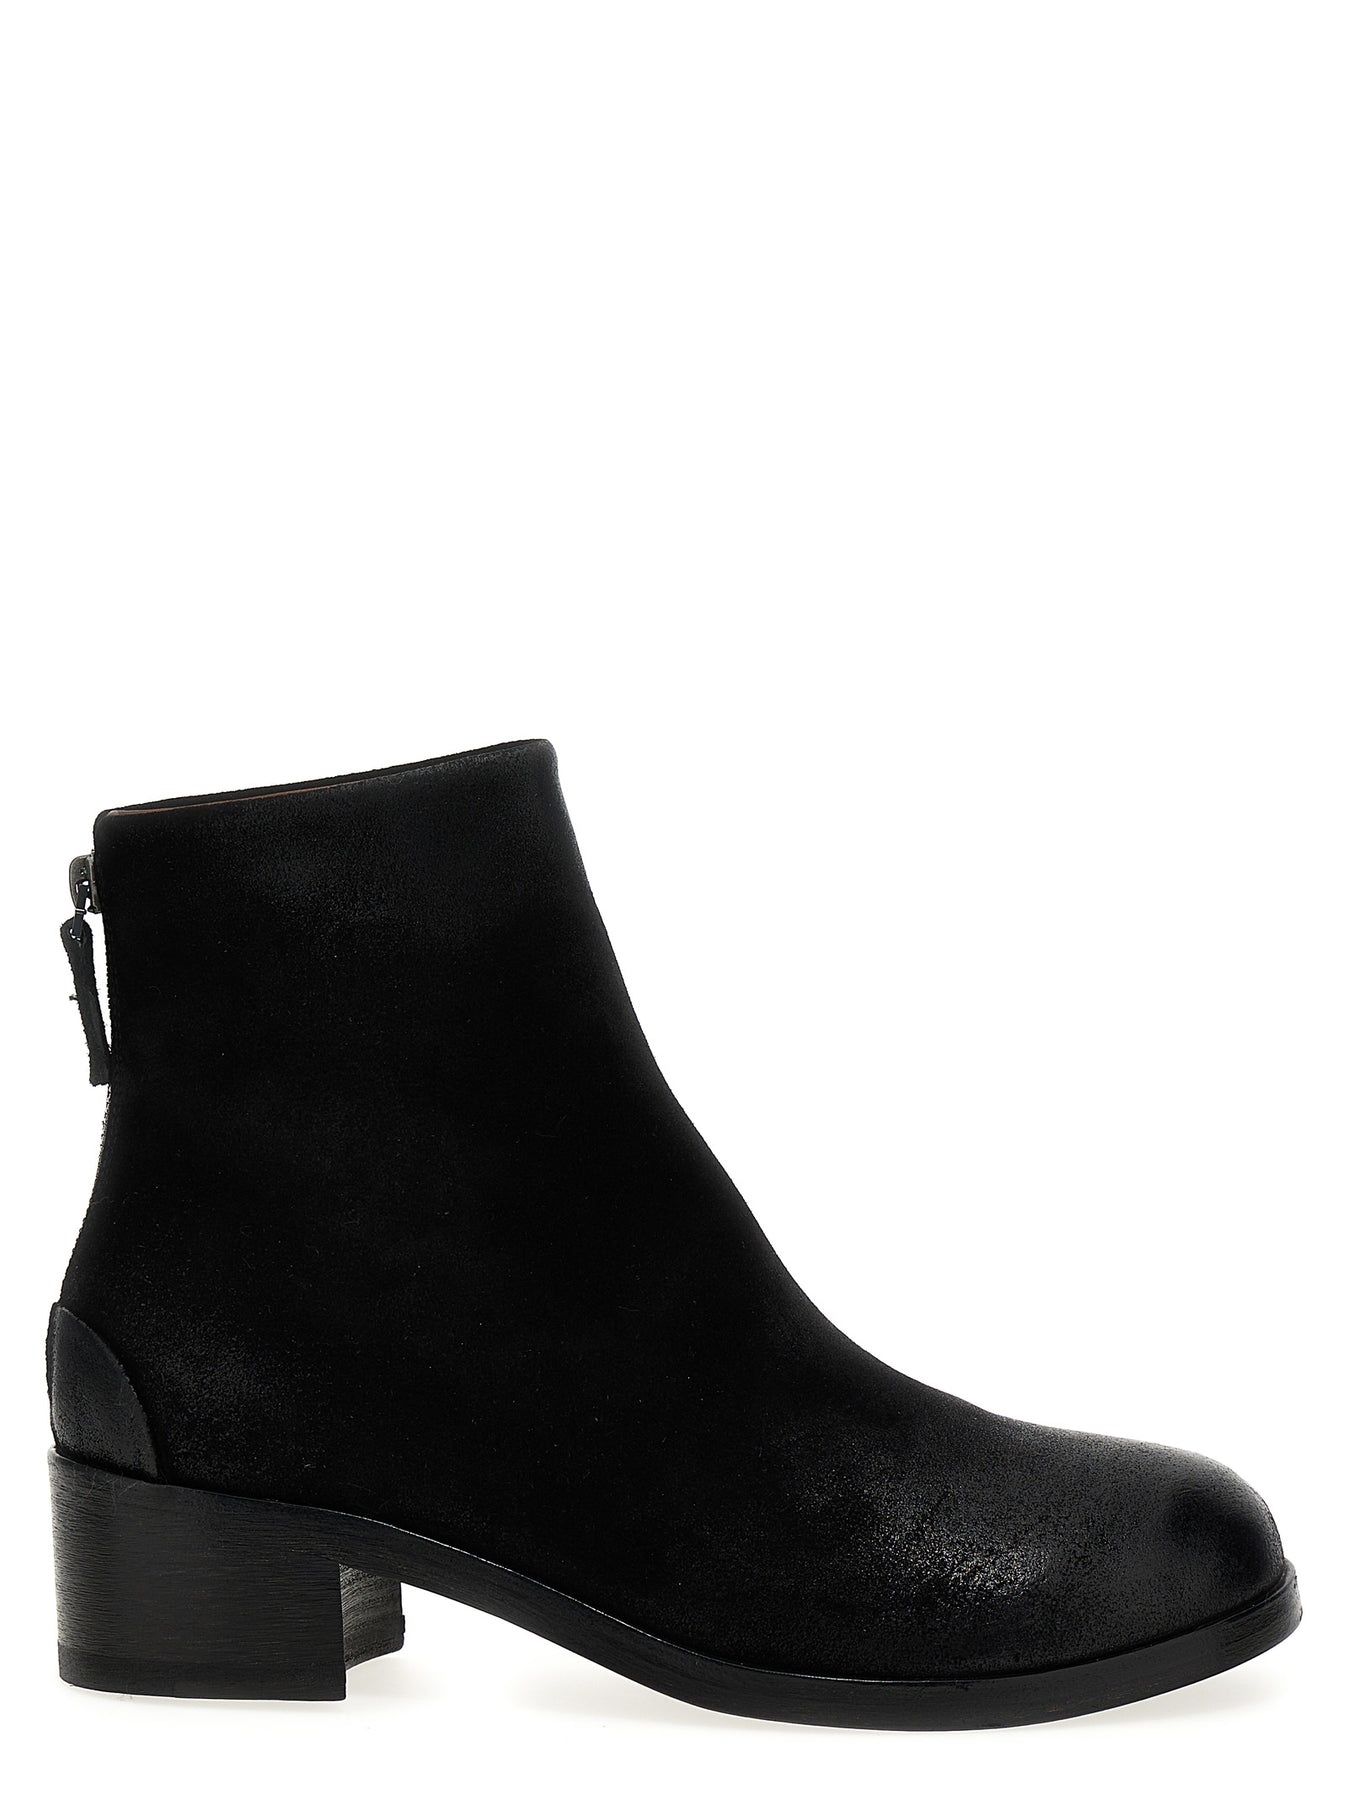 Listo Boots, Ankle Boots Black - 1